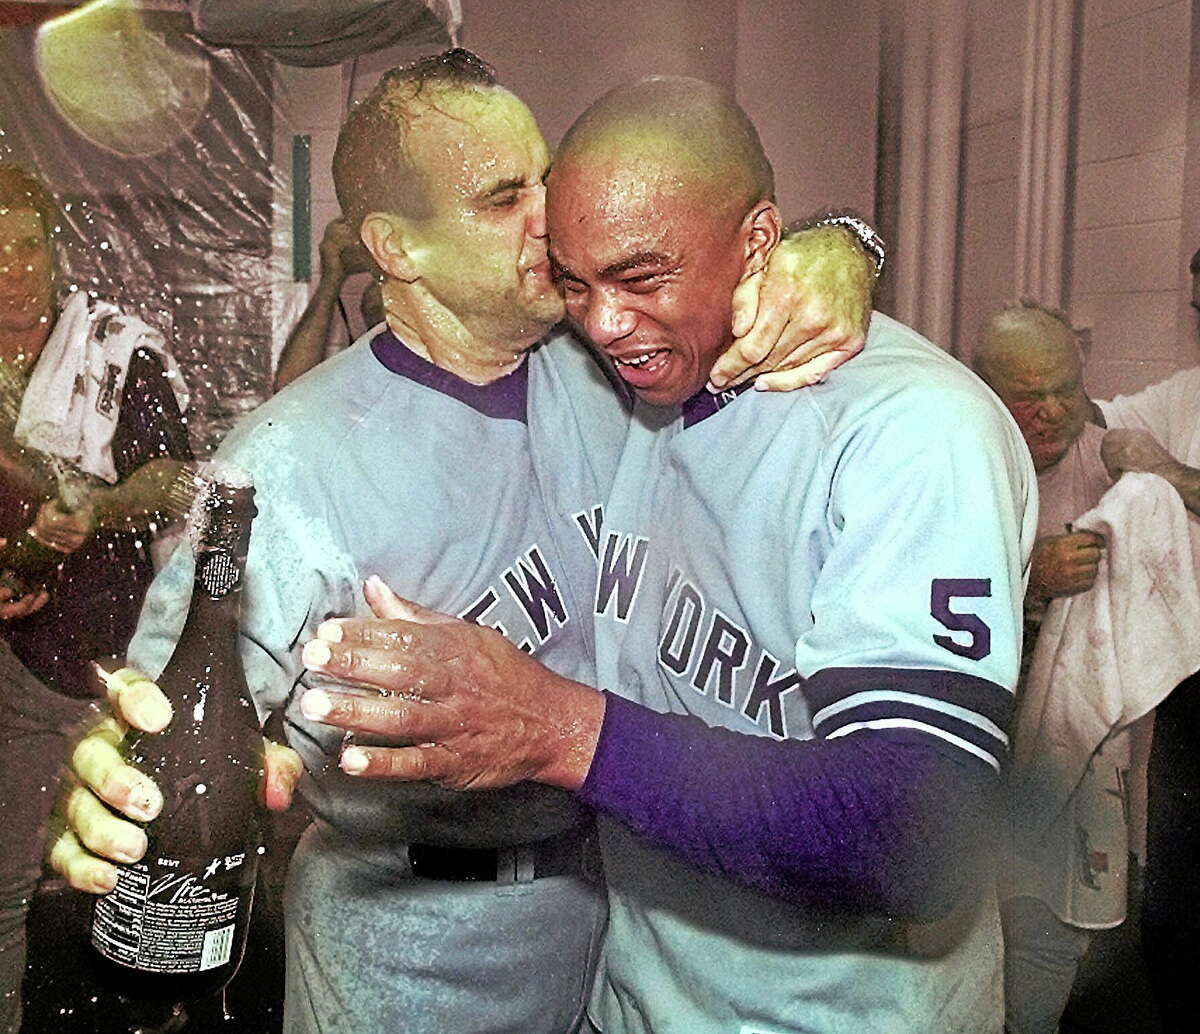 Former New York Yankees pitcher Orlando Hernandez, right, here with manager Joe Torre after the Yankees beat the Rangers to win the 1999 ALDS, is back with the Yankees as a spring training pitching instructor.